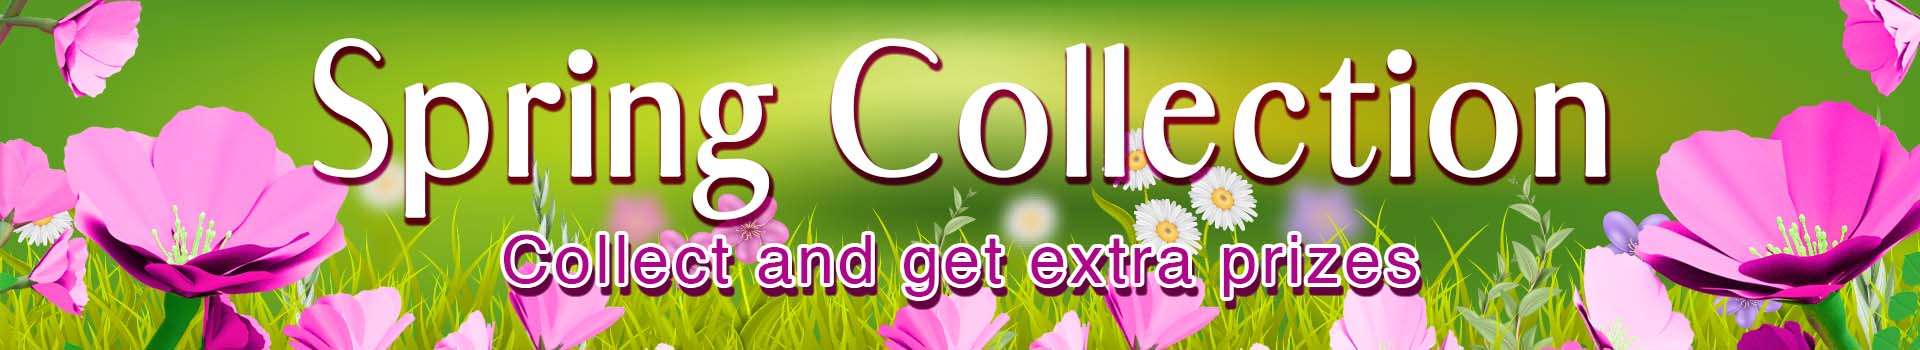 spring-collection Banner 